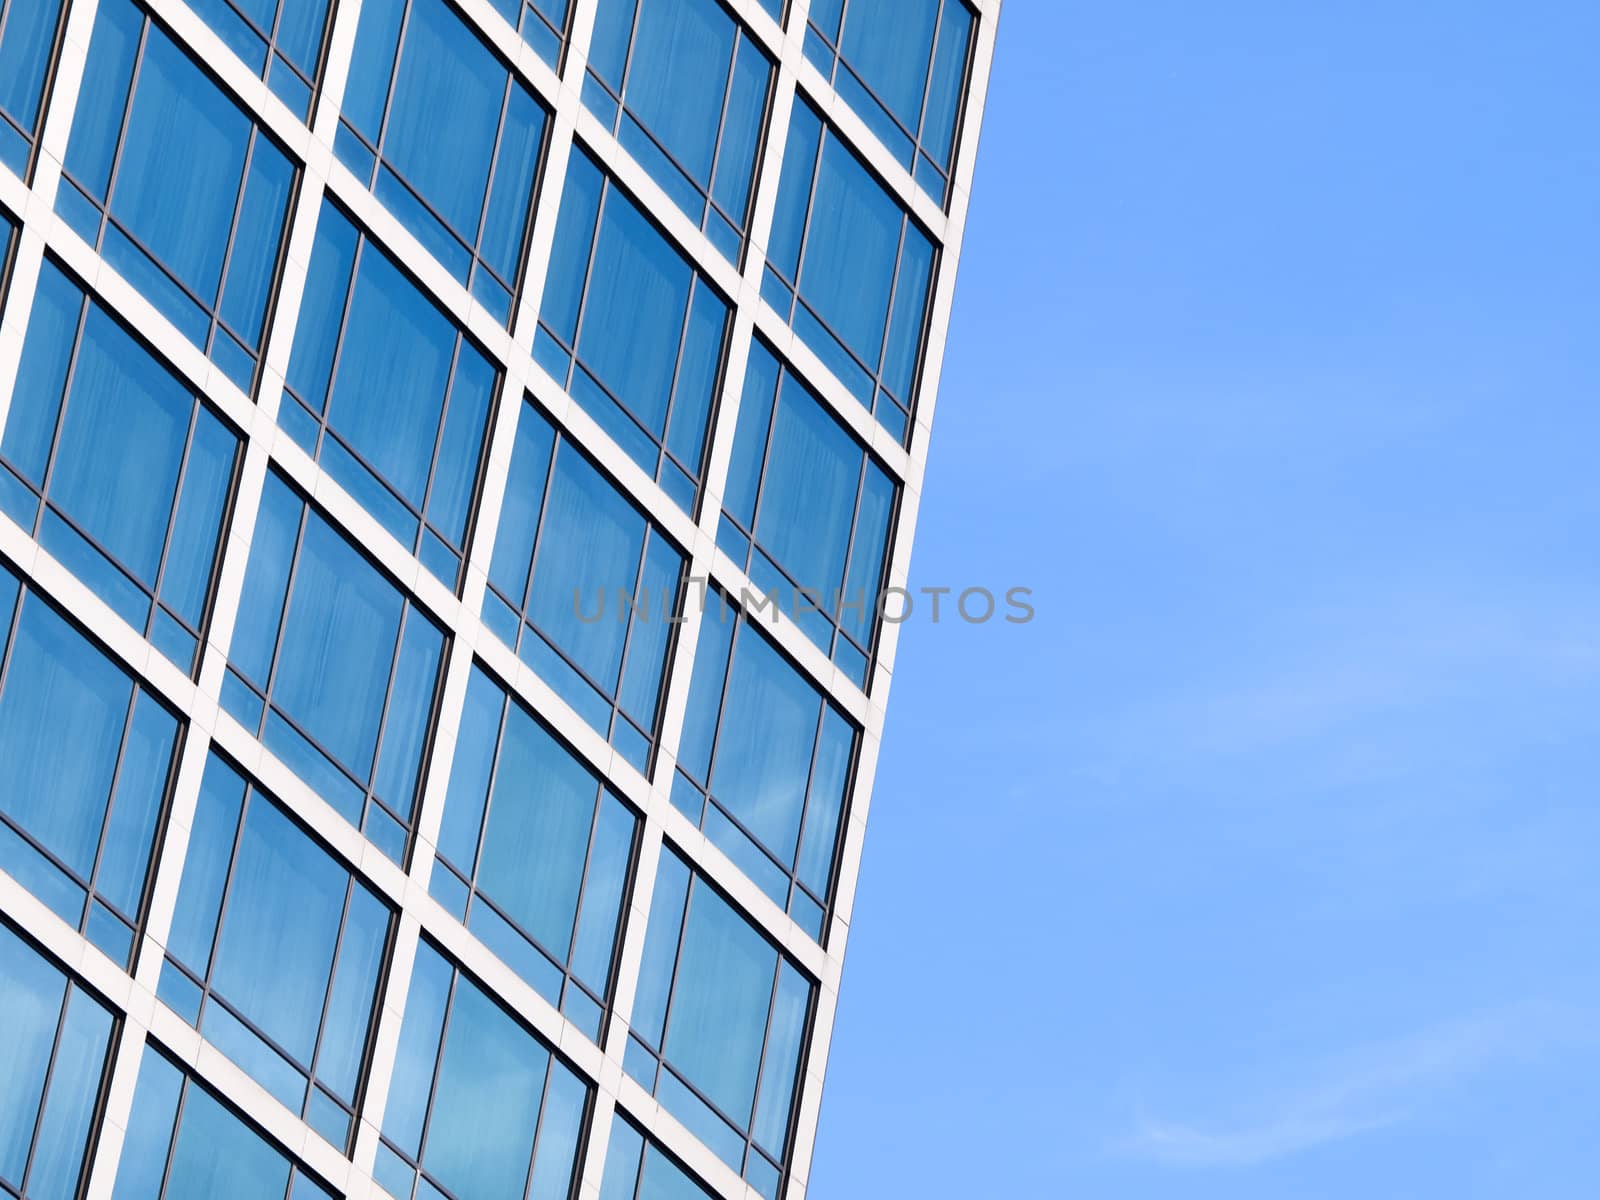 square pattern and the blue sky by jakgree